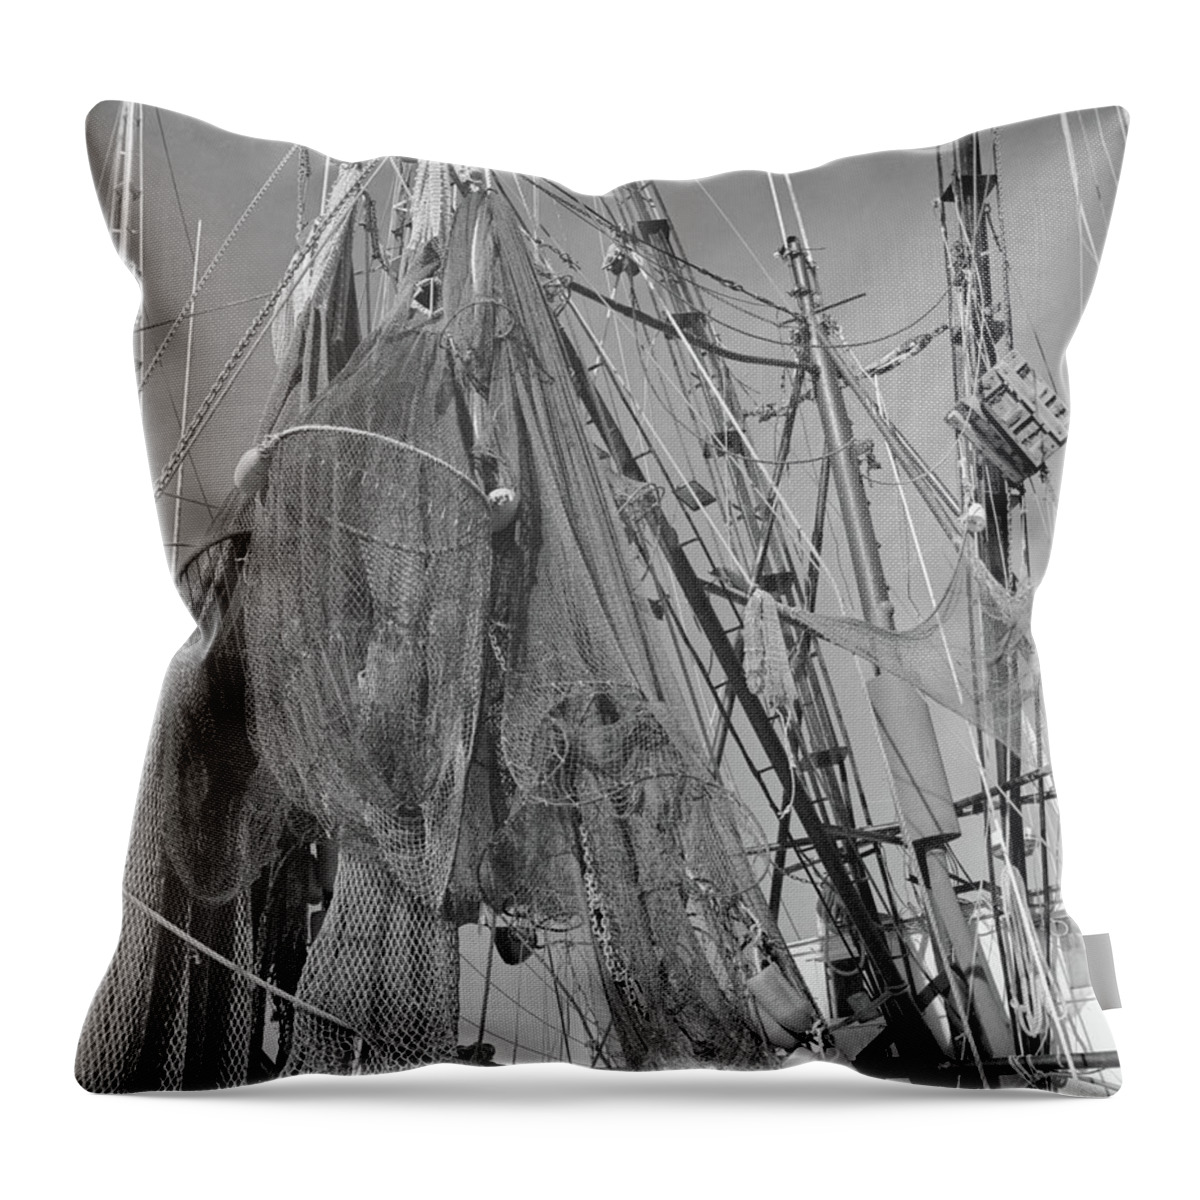 Shrimp Boat Throw Pillow featuring the photograph Shrimp Boat Rigging by John Simmons